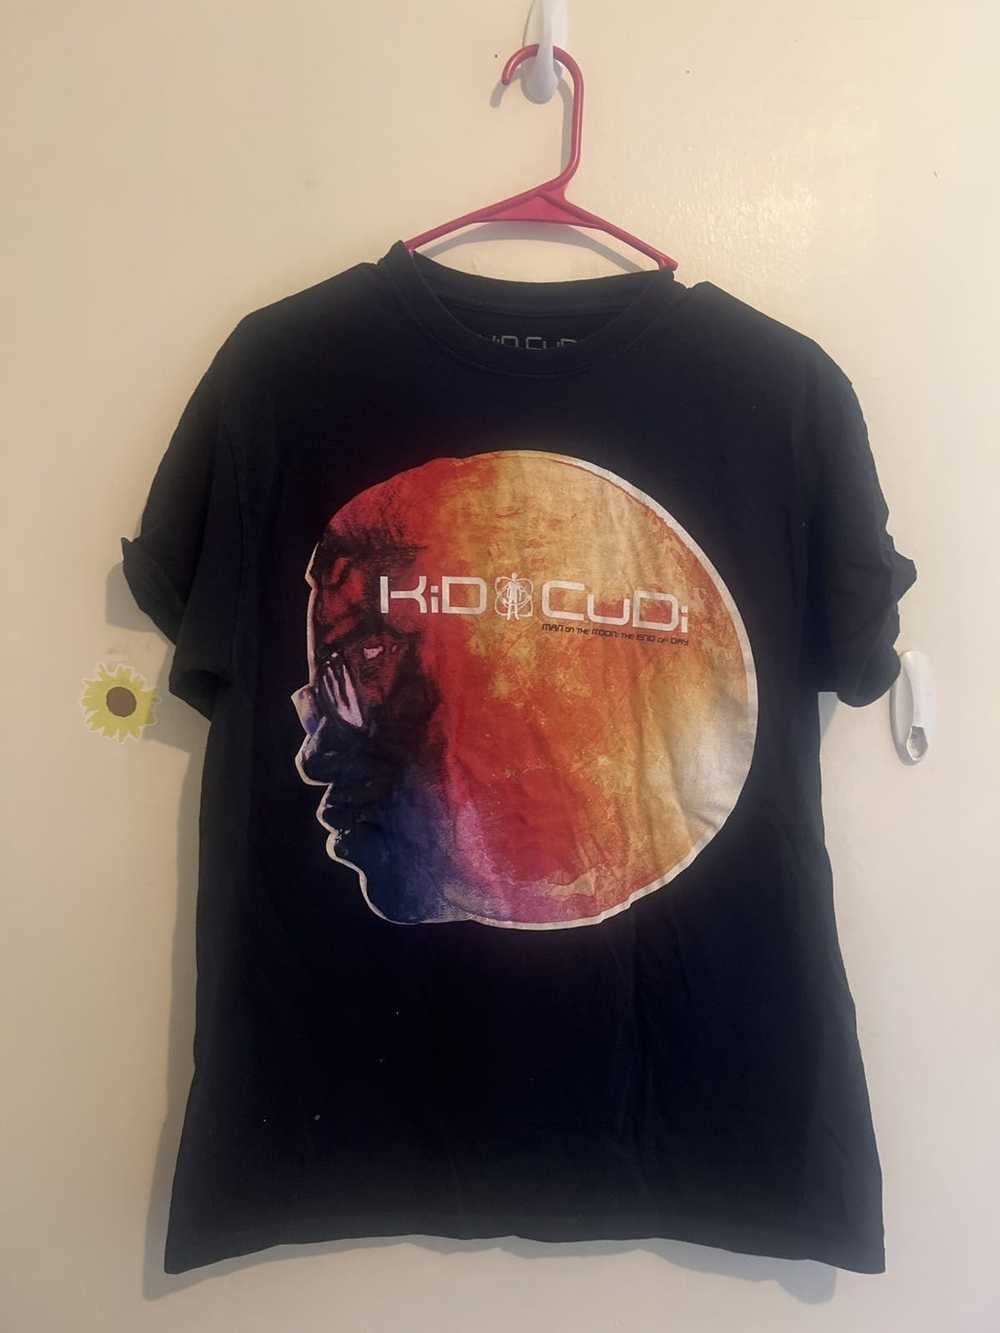 Urban Outfitters Kid cudi t shirt - image 1